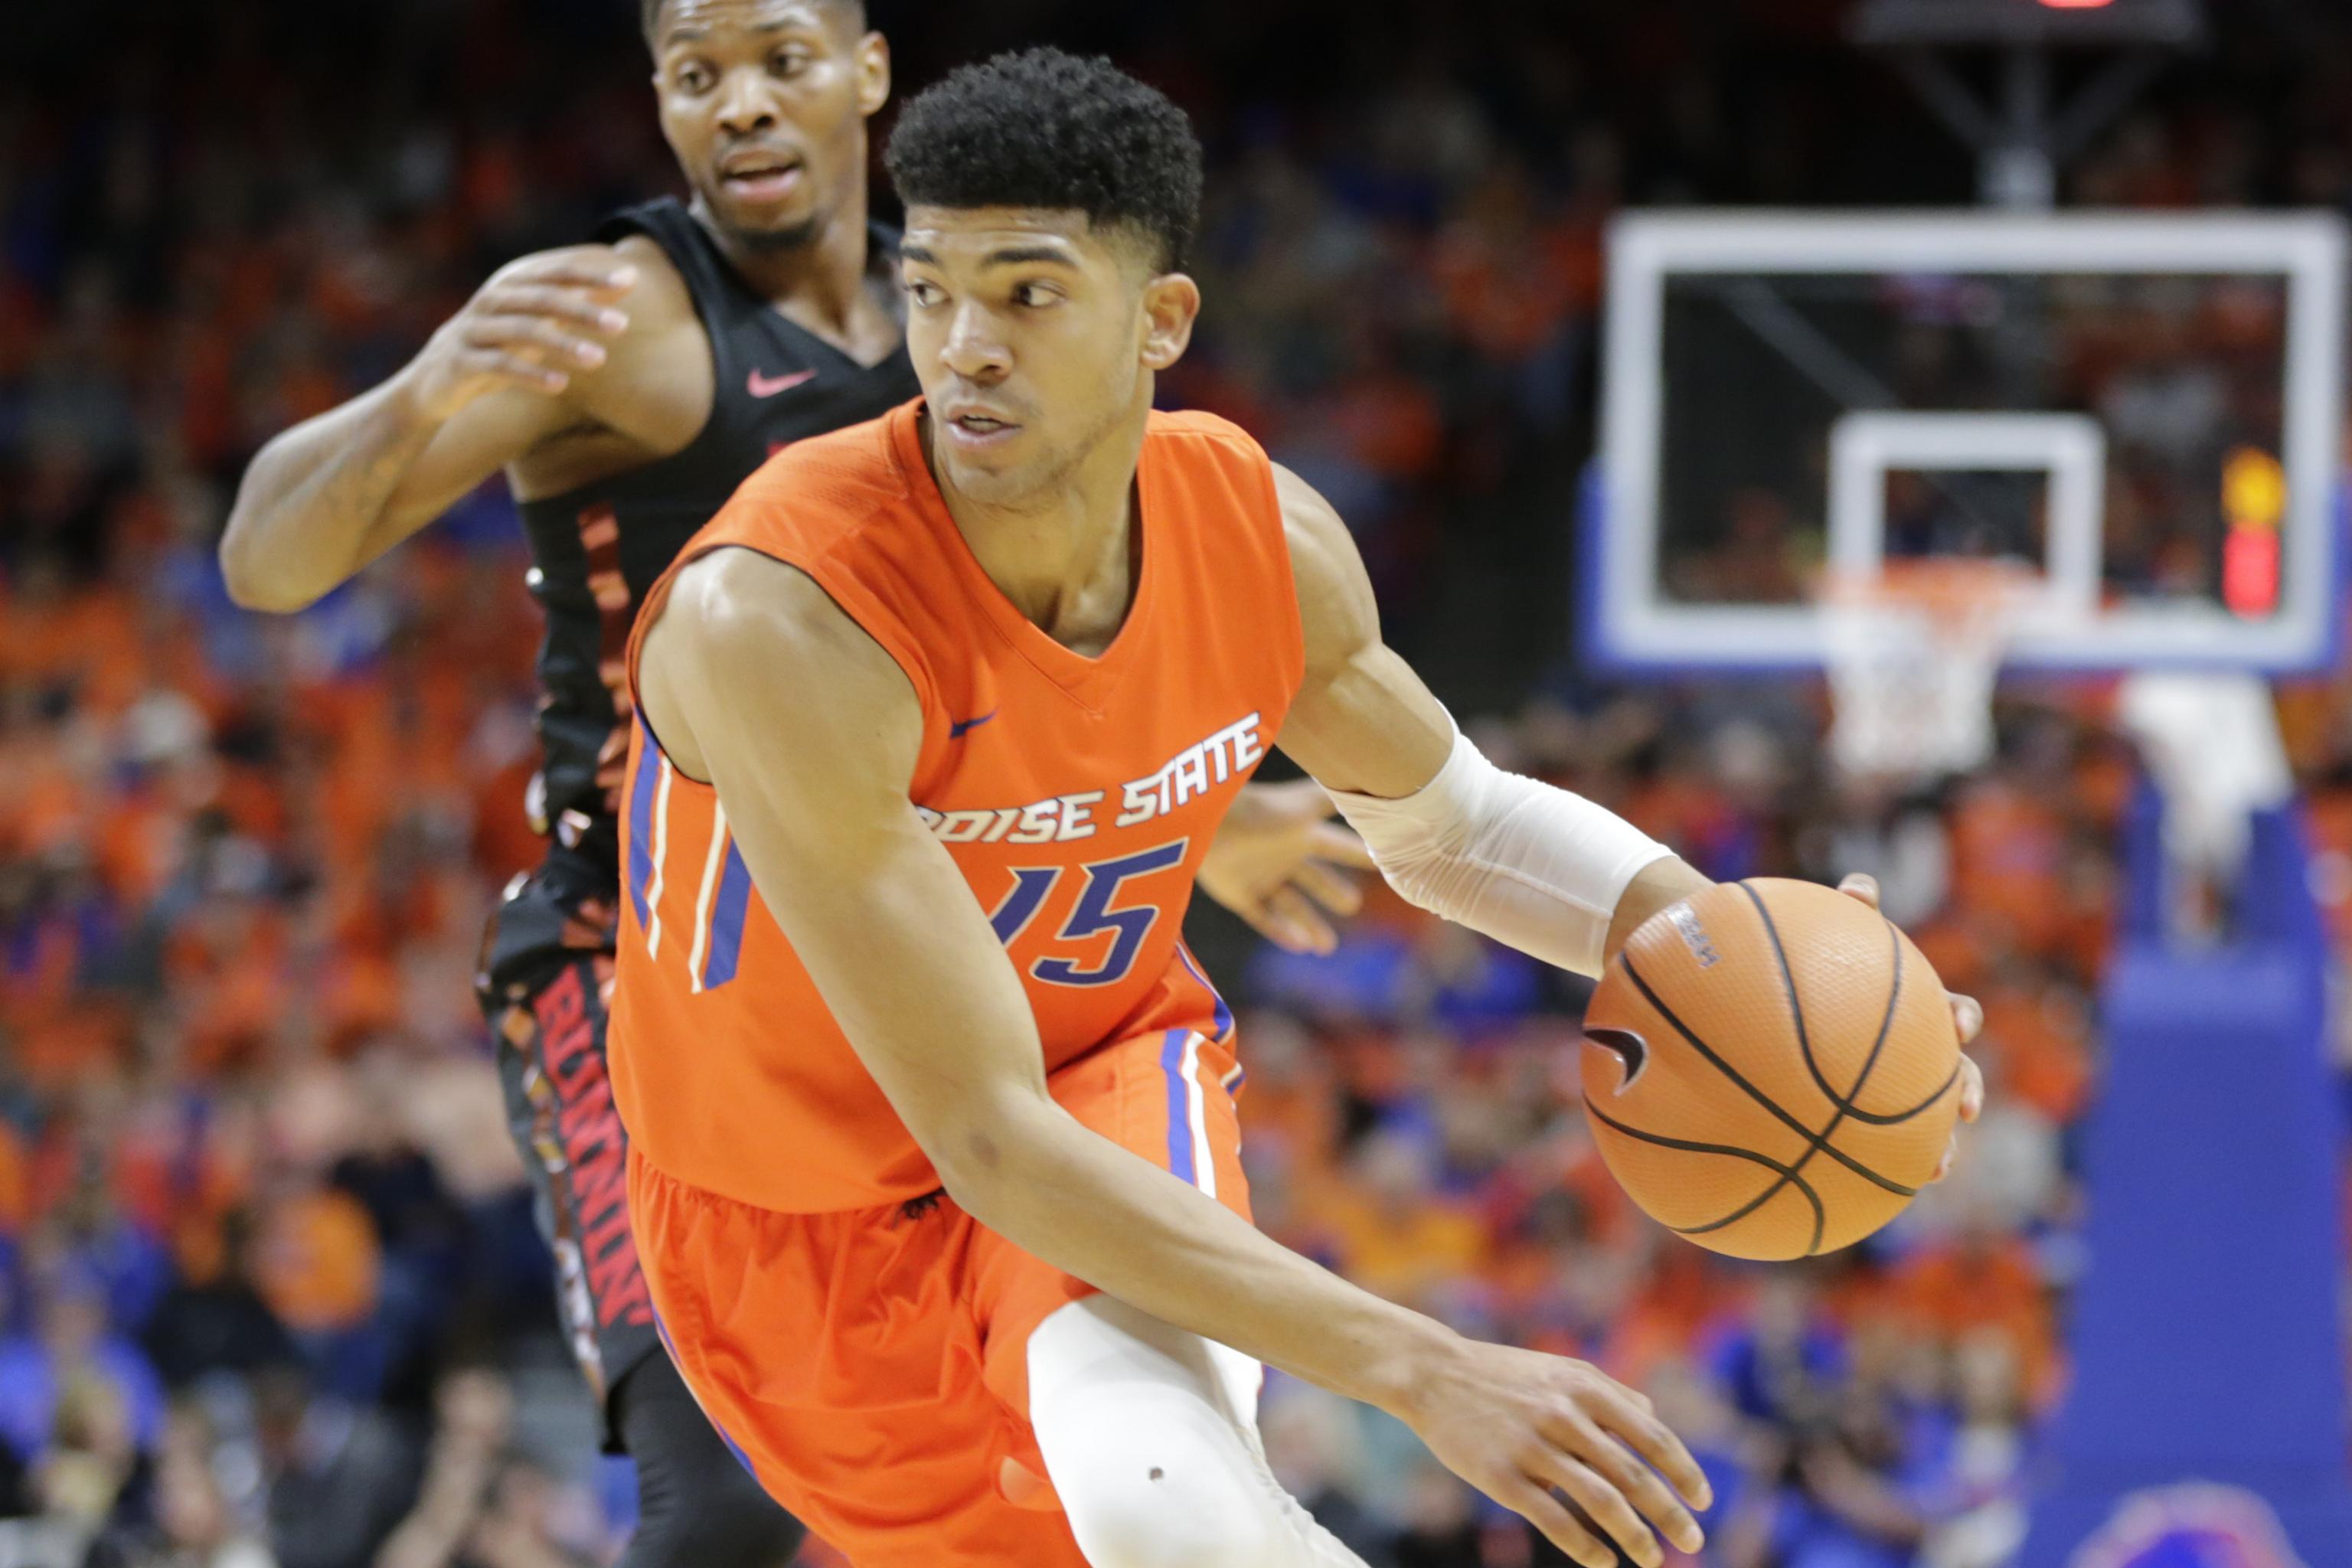 Former Chicago Bull Chandler Hutchison hangs it up at age 26 - Sports  Illustrated Chicago Bulls News, Analysis and More